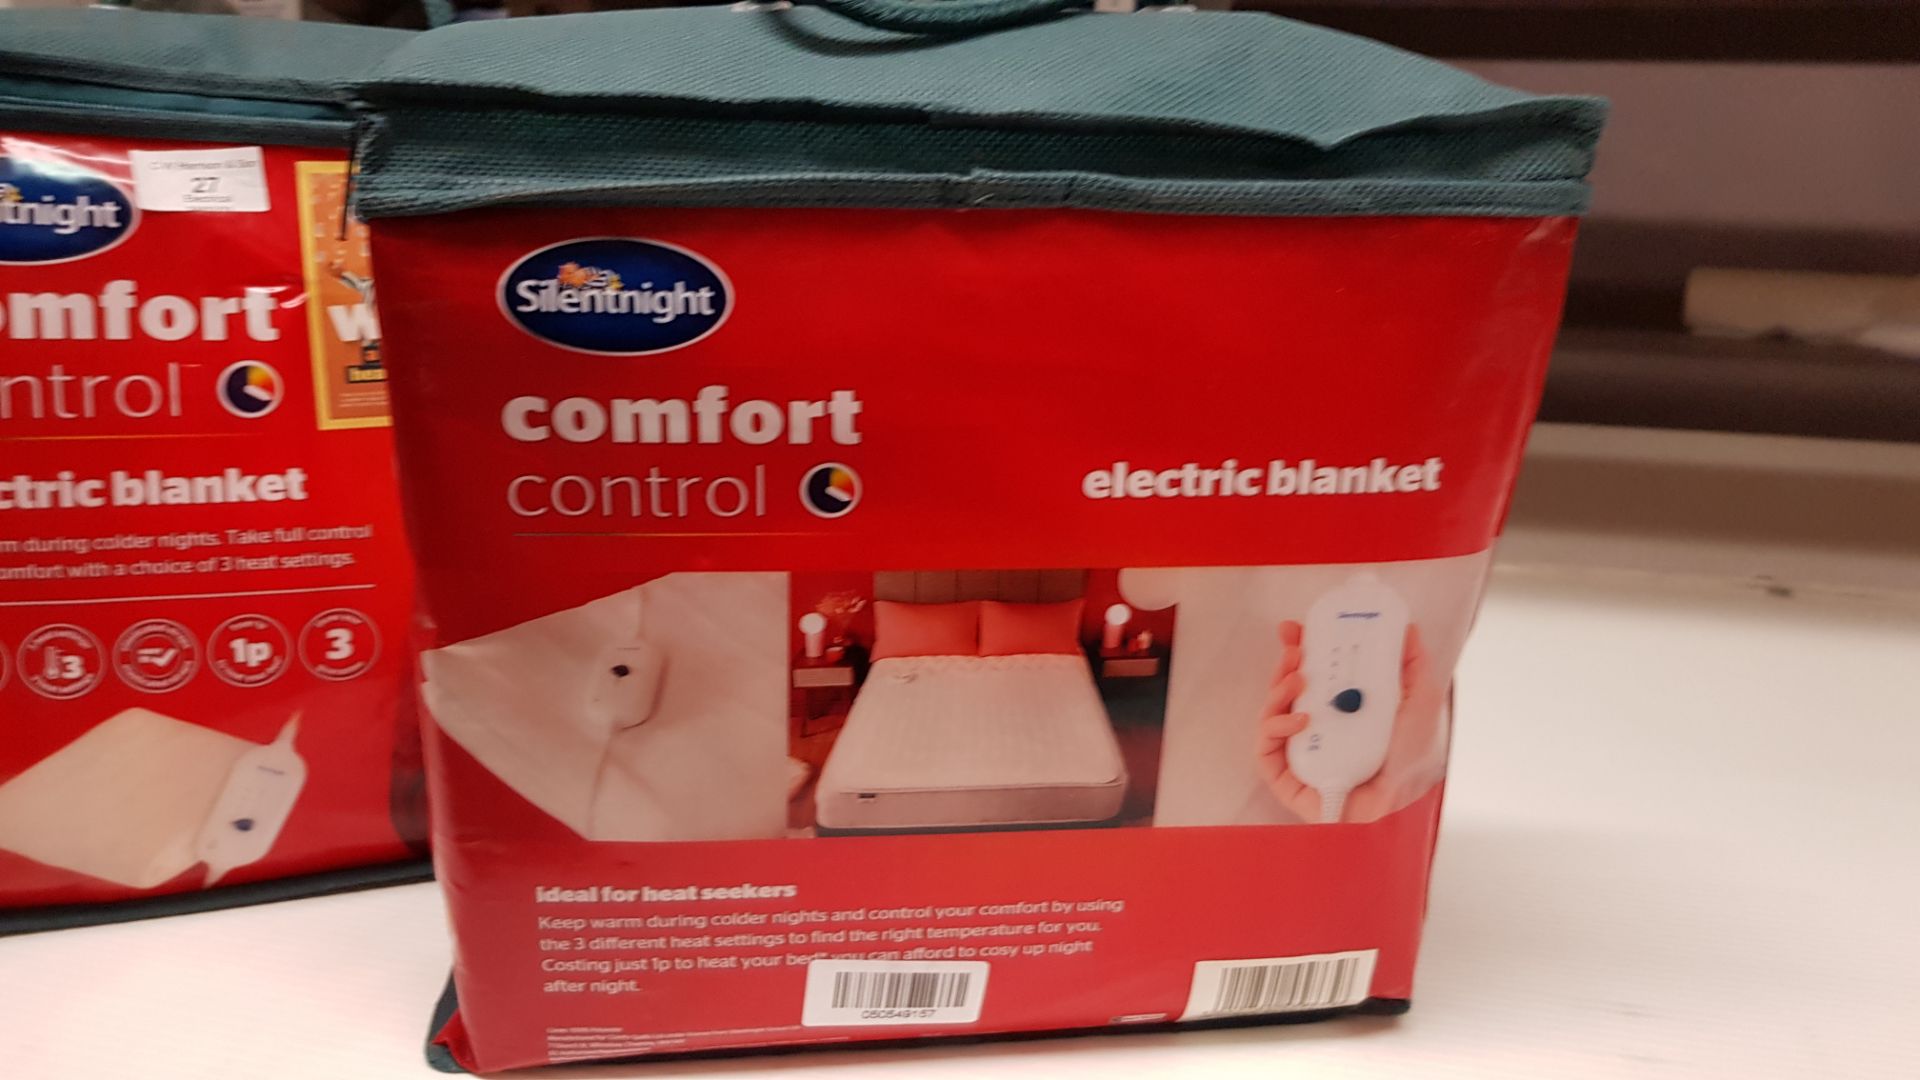 2x Silentnight Comfort Control Electric Blanket Double. RRP £50 Each. - Image 3 of 3